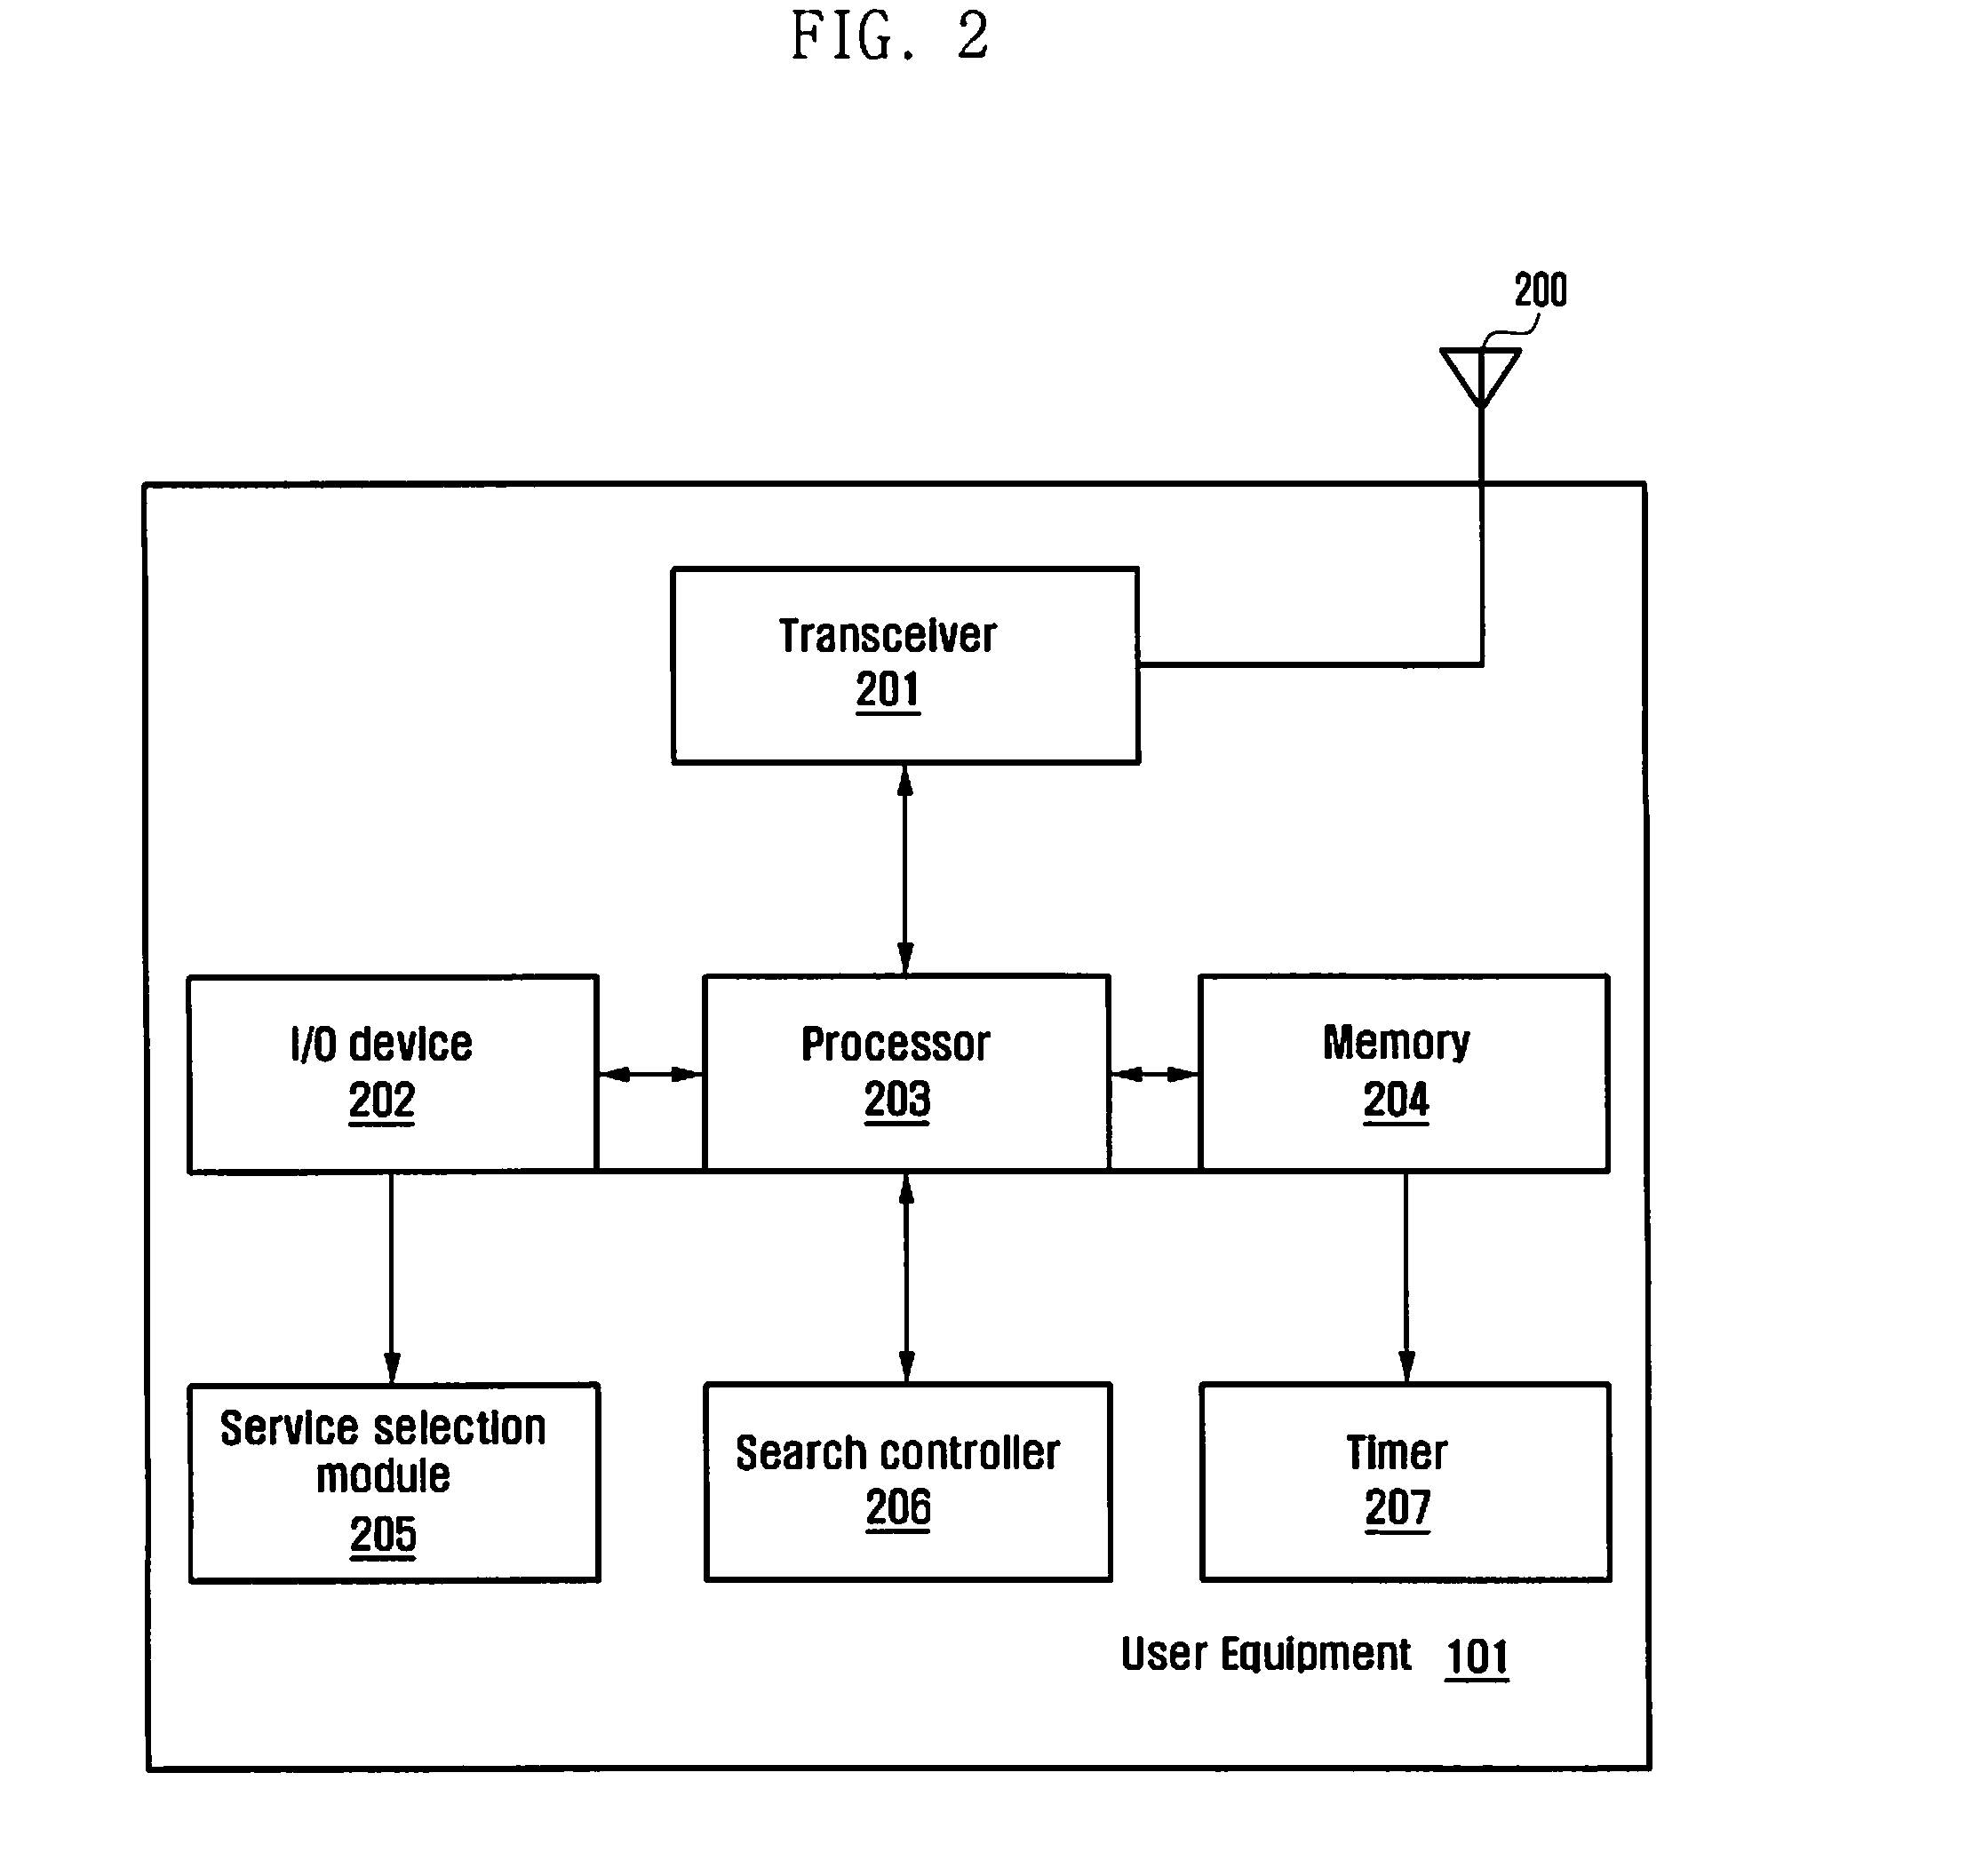 Method for optimized high priority plmn search and normal service scan in limited service